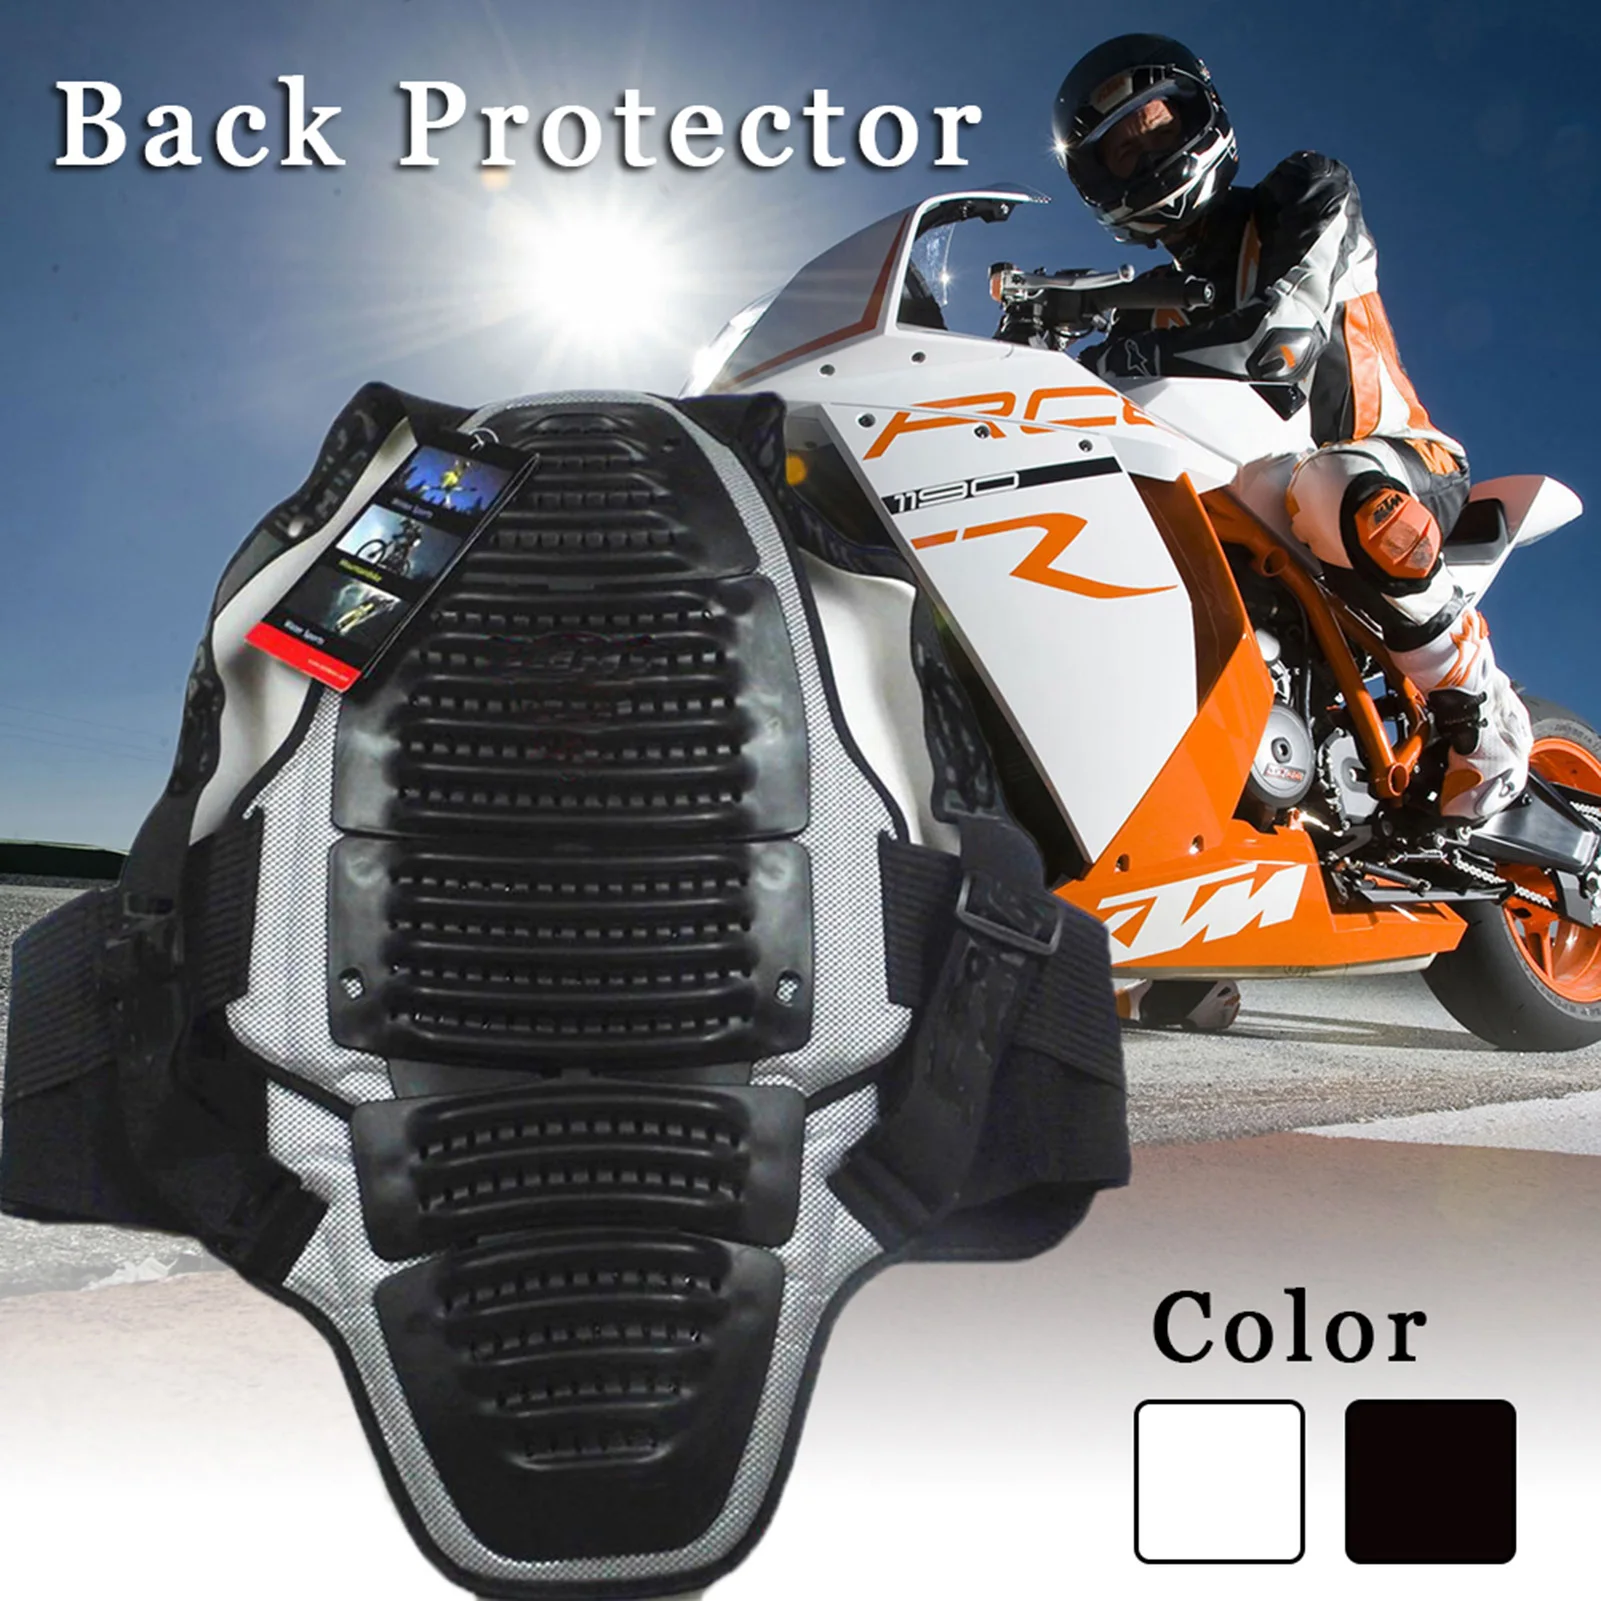 

Motorcycle Knight Back Protector Safe Breathable Detachable Professional EVA Armor Riding Equipment Extreme Sports Protection